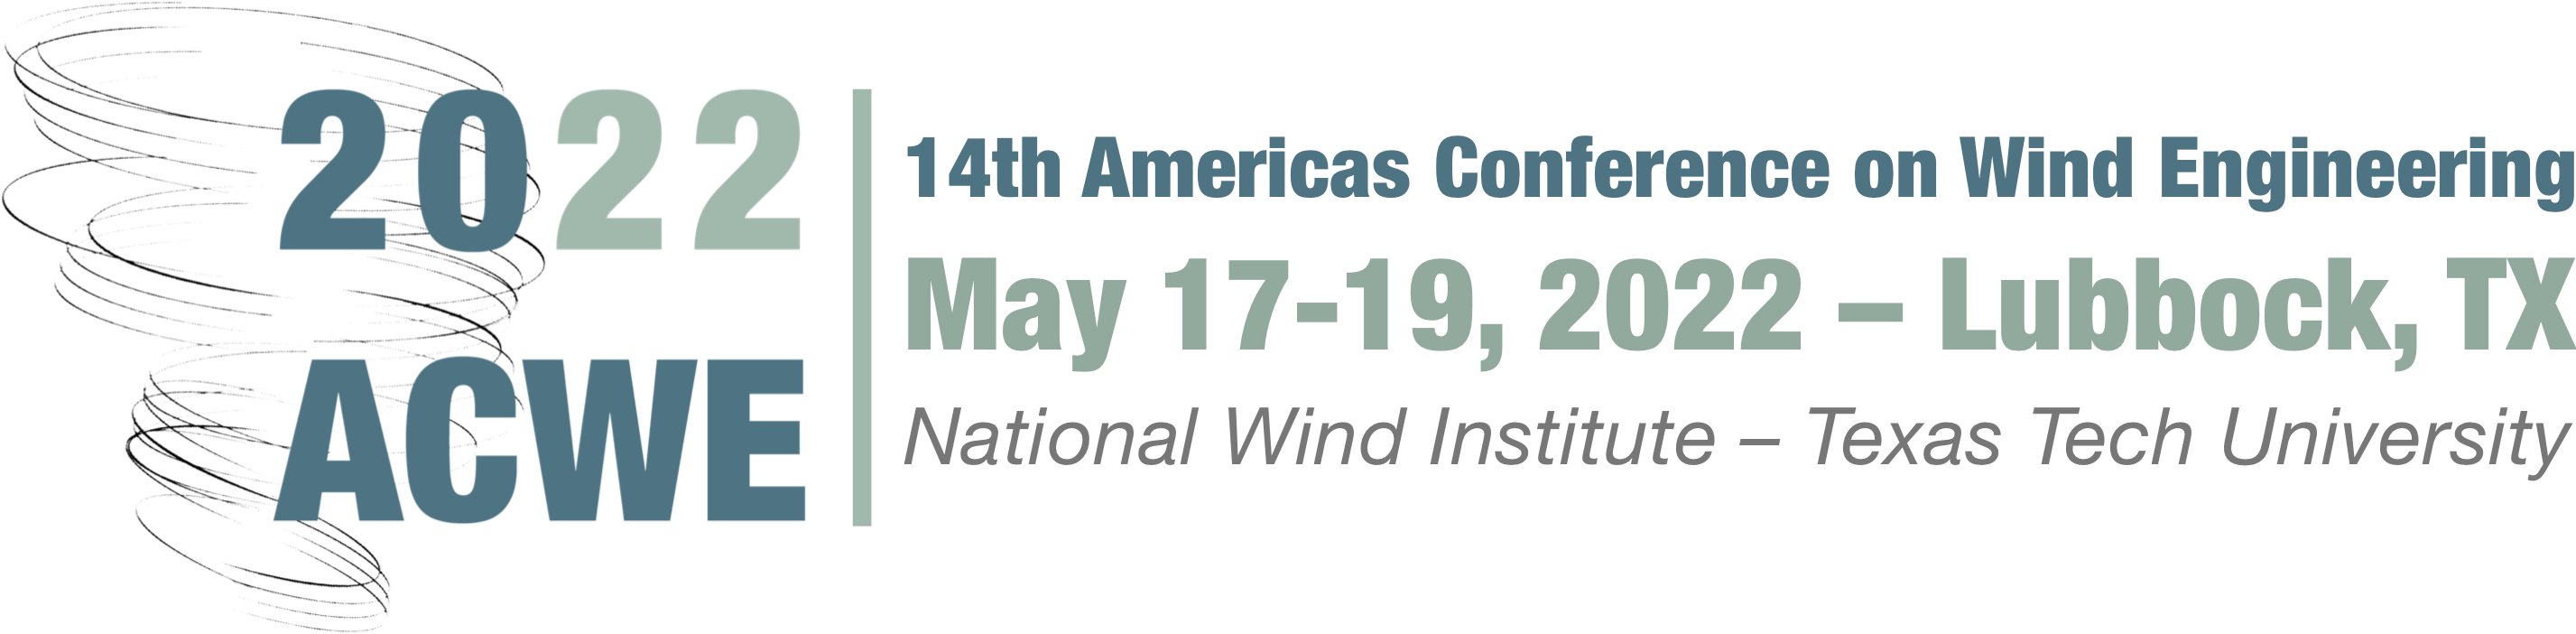 14th Americas Conference on Wind Engineering; May 17-19, 2022 - Lubbock, TX; National Wind Institute - Texas Tech University